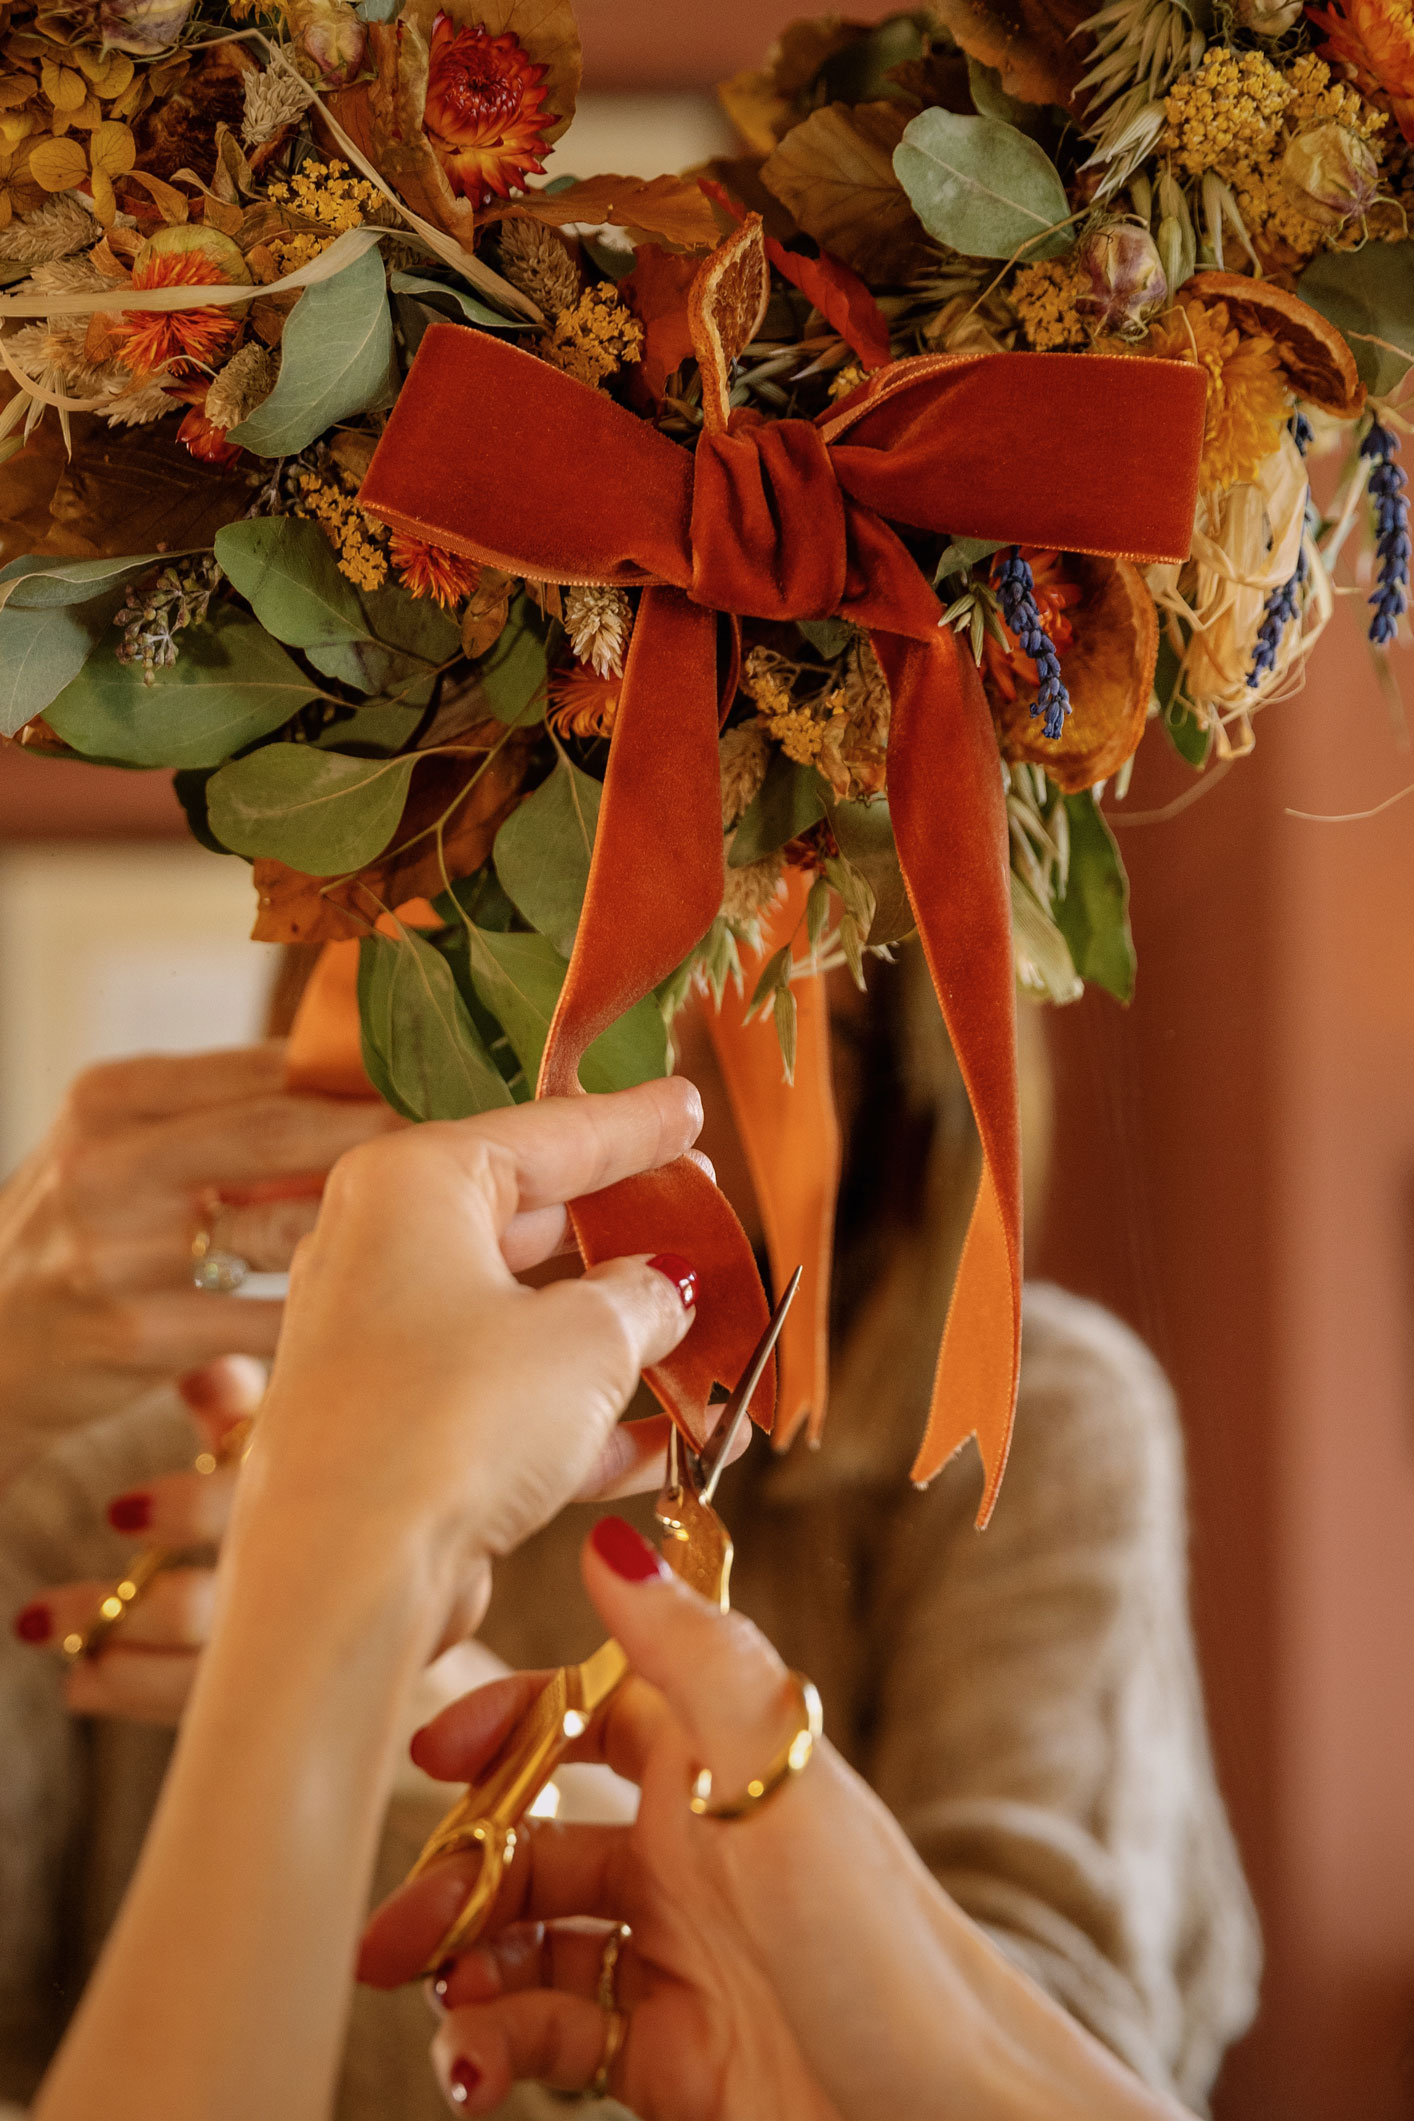 Louise & her Fall DIY wreath and mantle decor